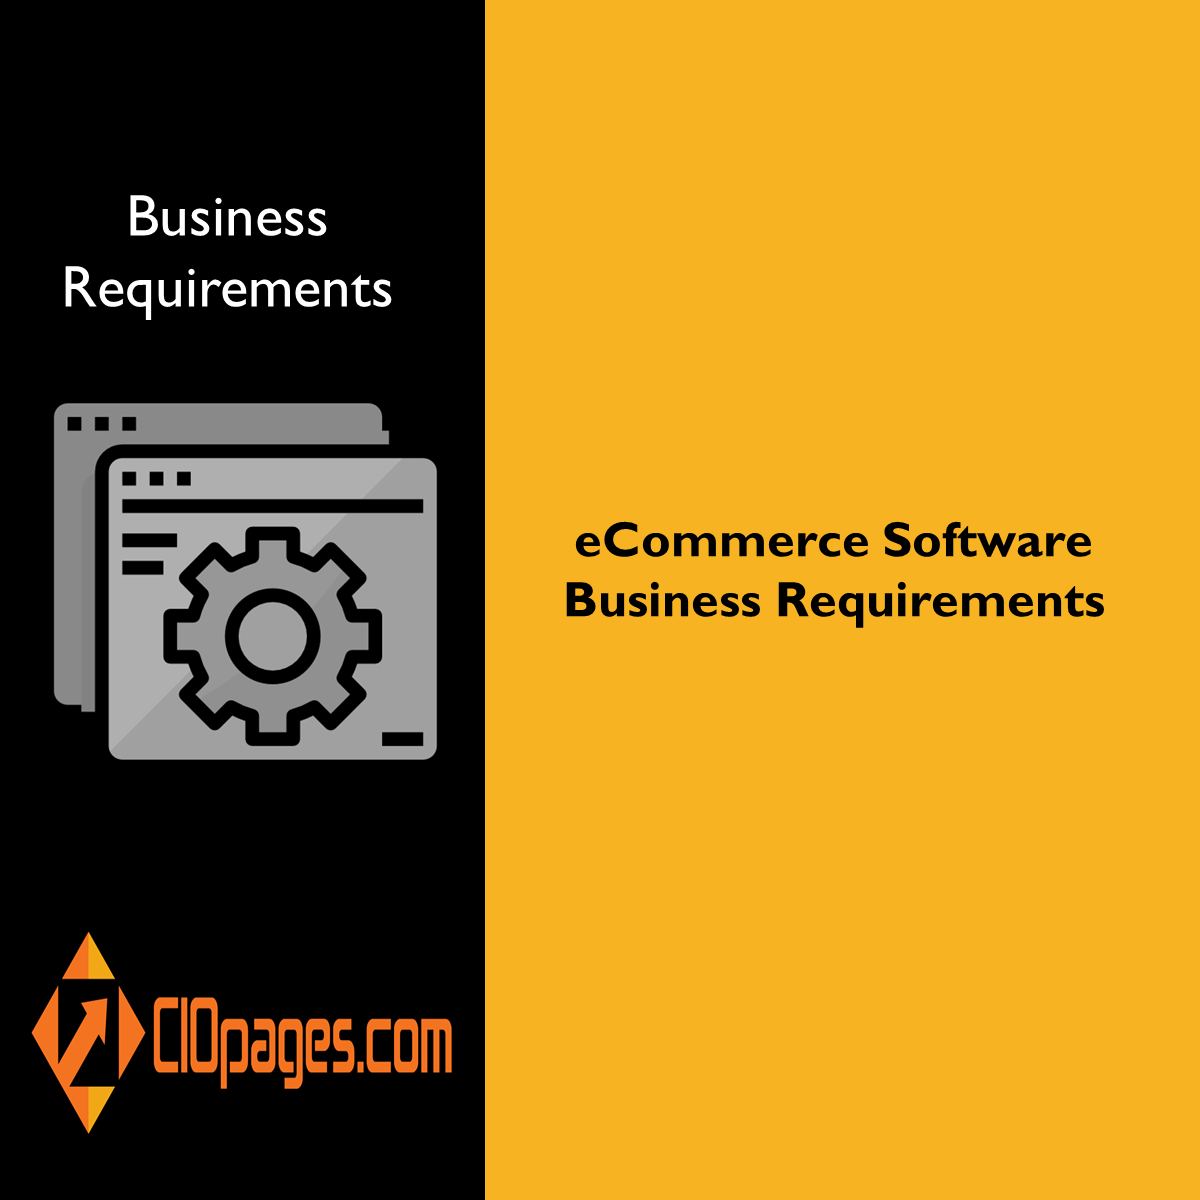 eCommerce Software Business Requirements